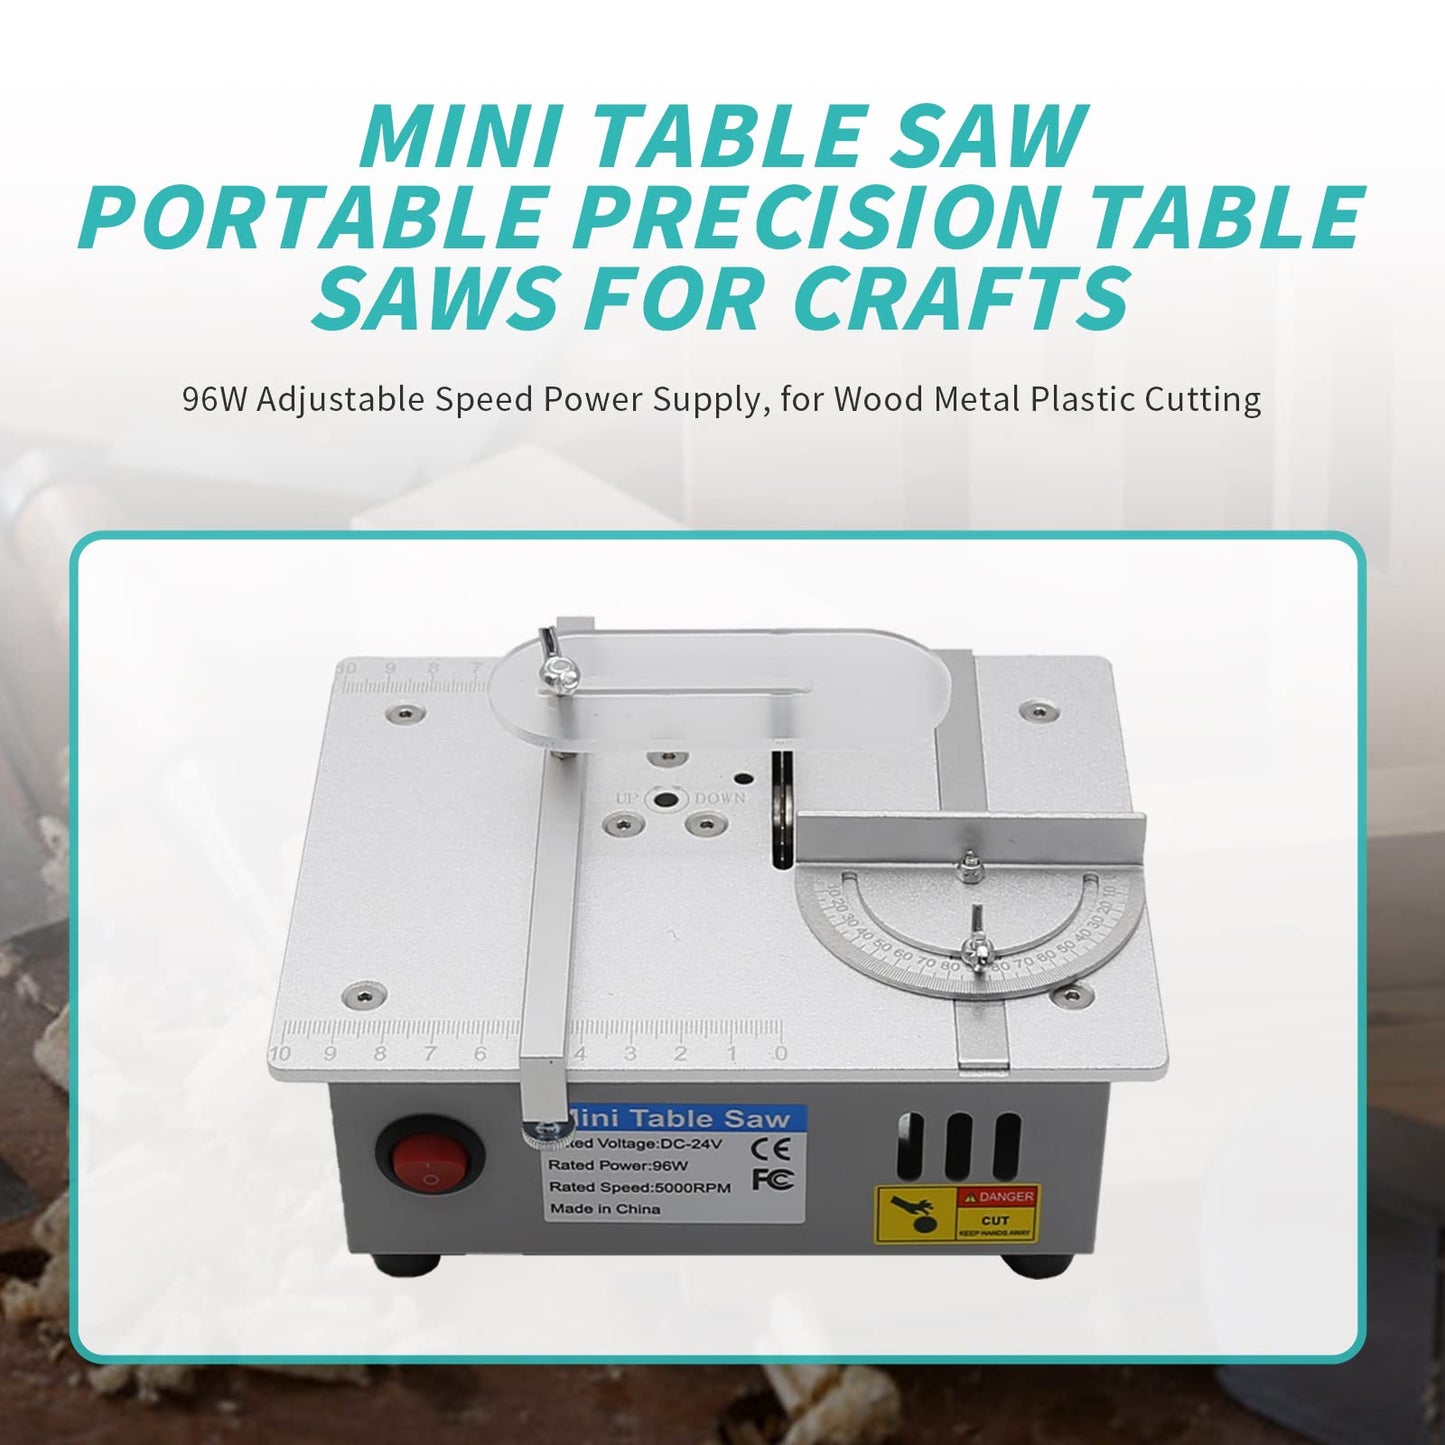 Mini Table Saw for Crafts 4 Blades Metal Chop Saw 96W Adjustable Cut Depth 7-speed Power Supply Portable Cut Off Table Saw for Woodworking Plastic